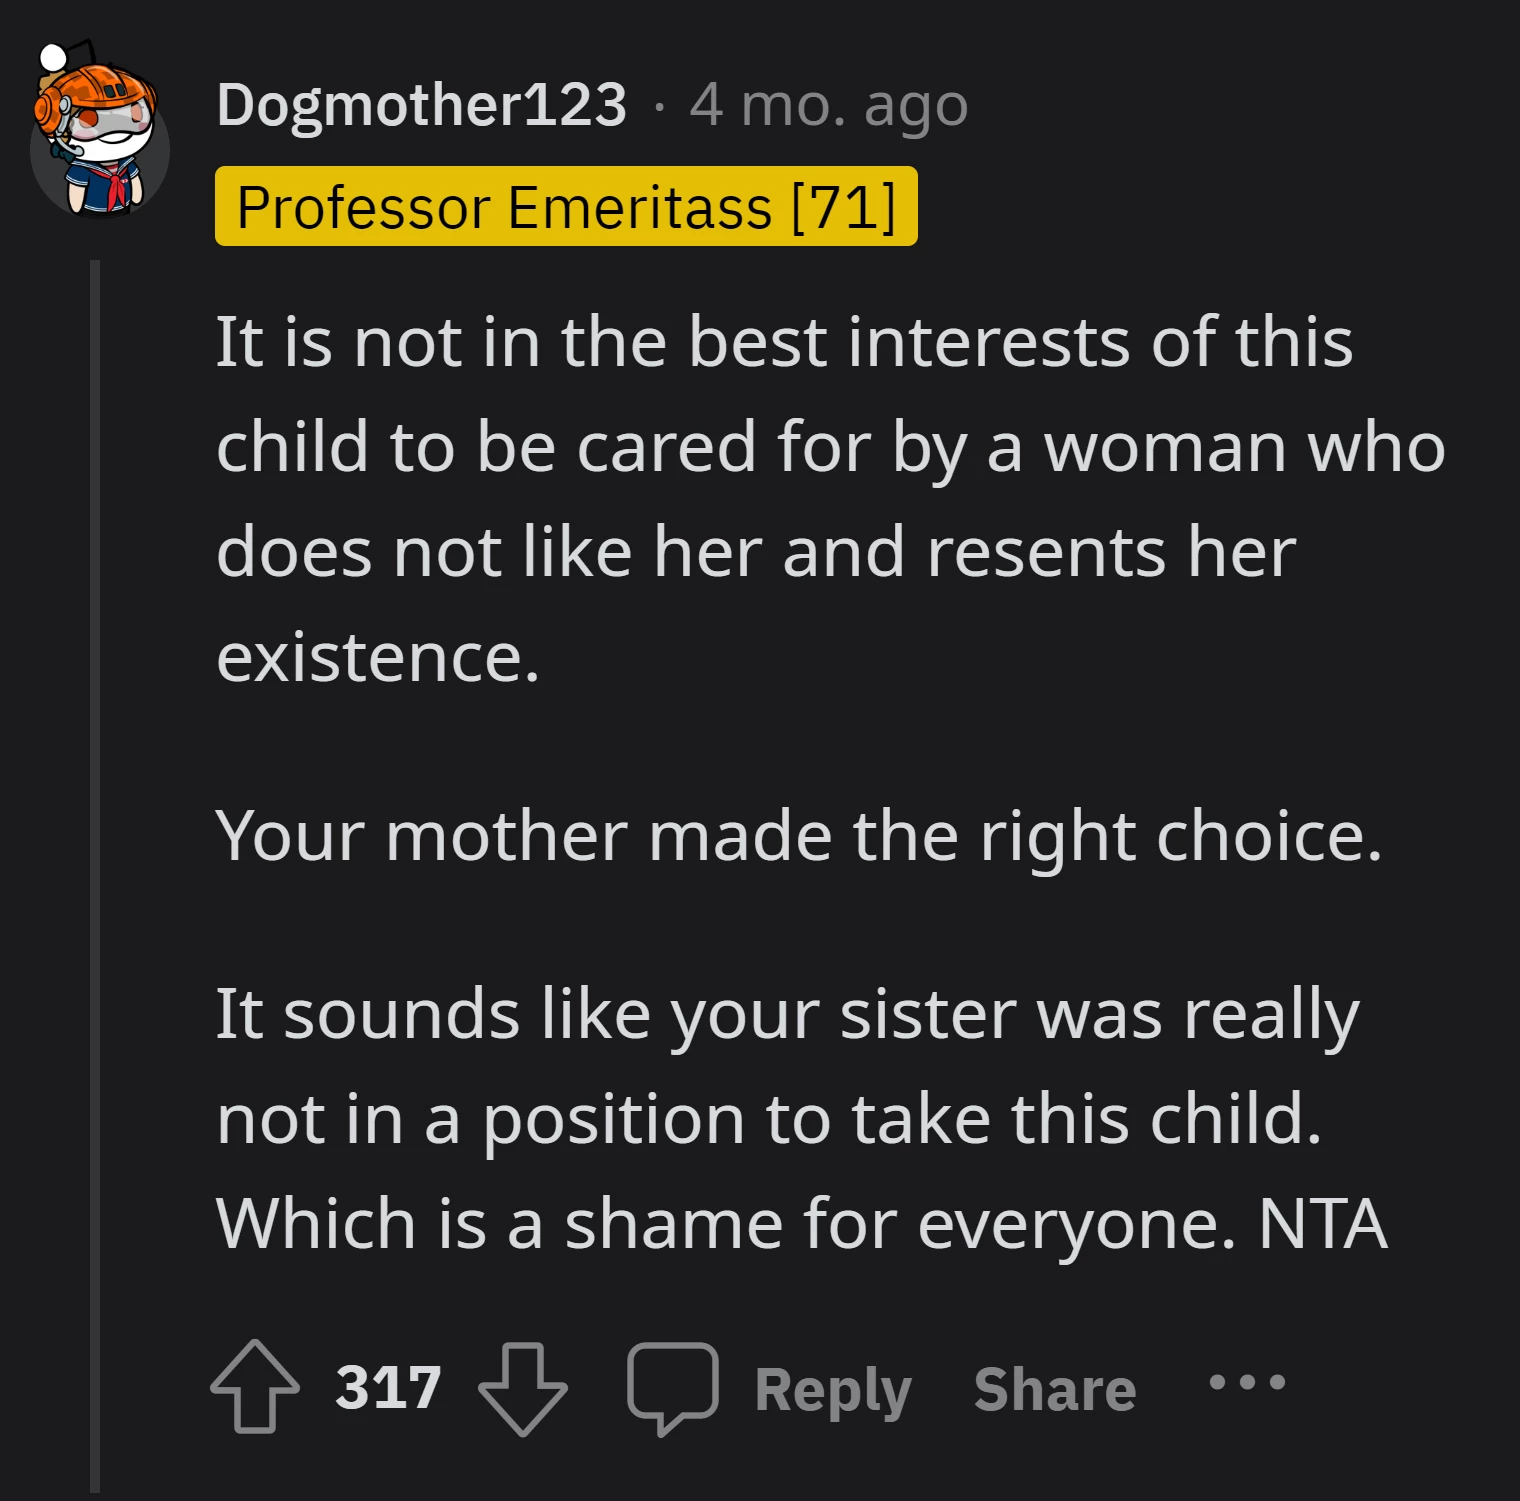 The Redditor believes OP's mom made the right choice